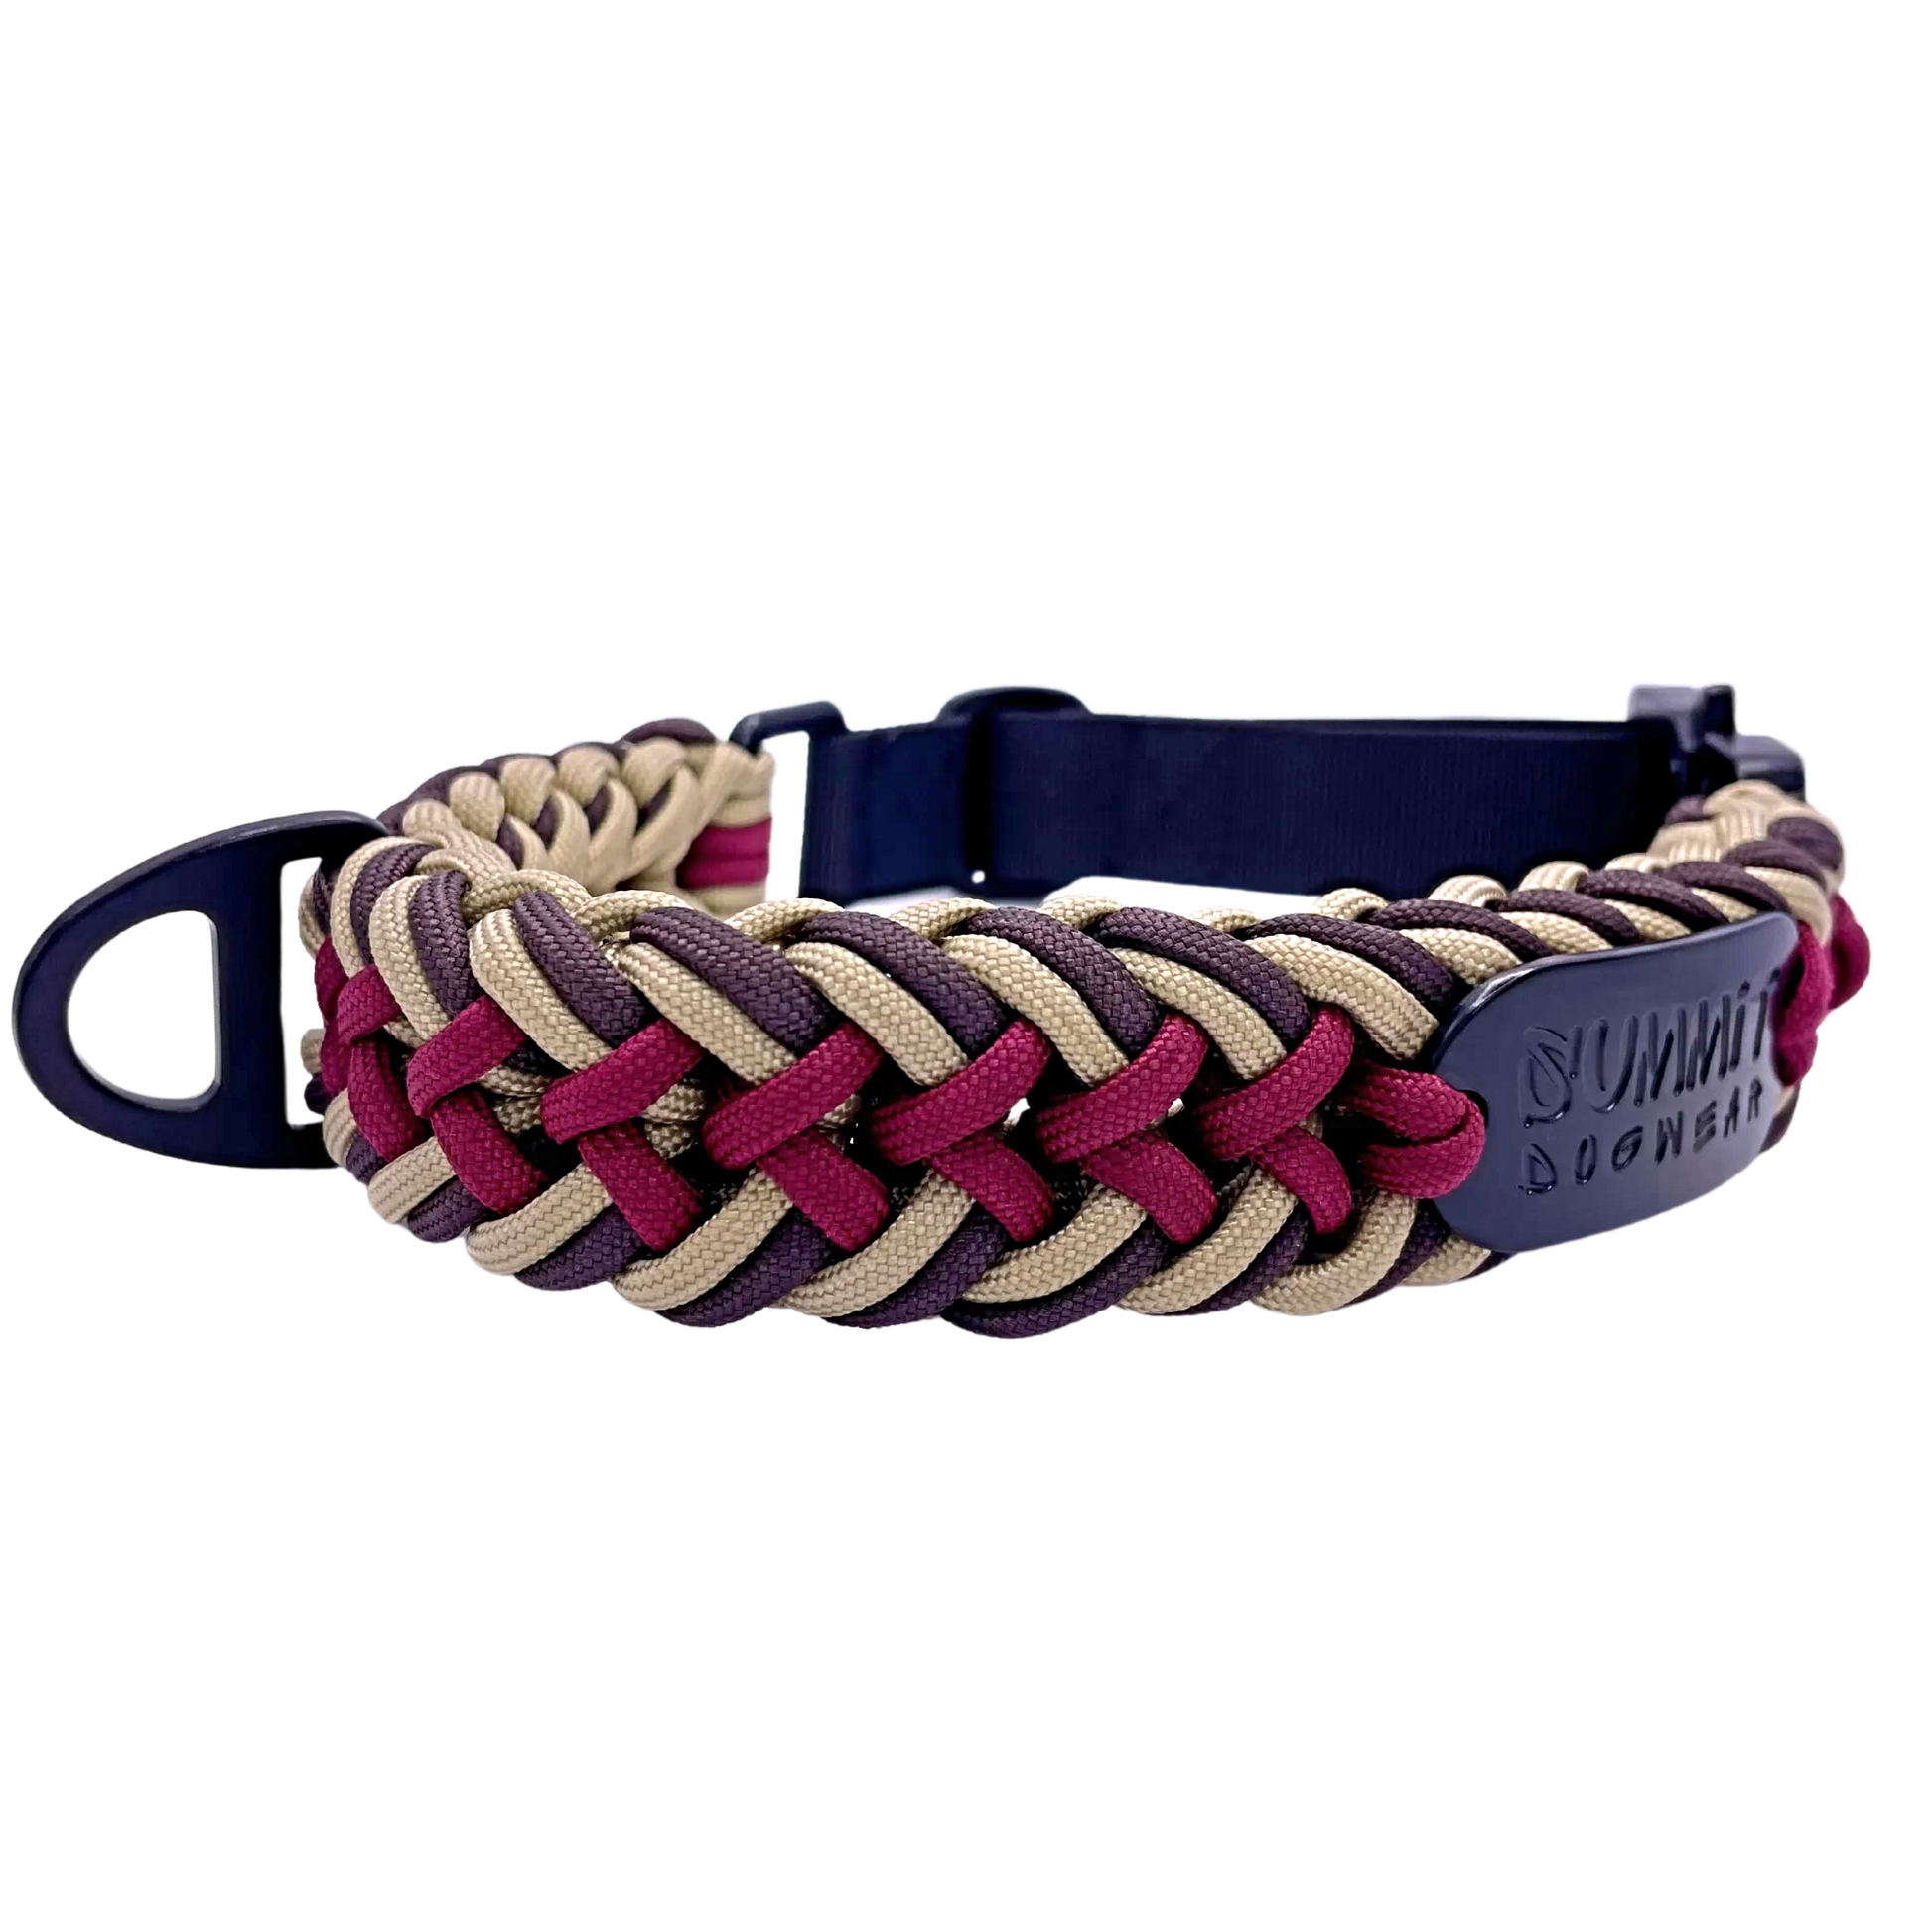 Premium ultra strong quick-release tactical braided paracord dog collar in nomad colors